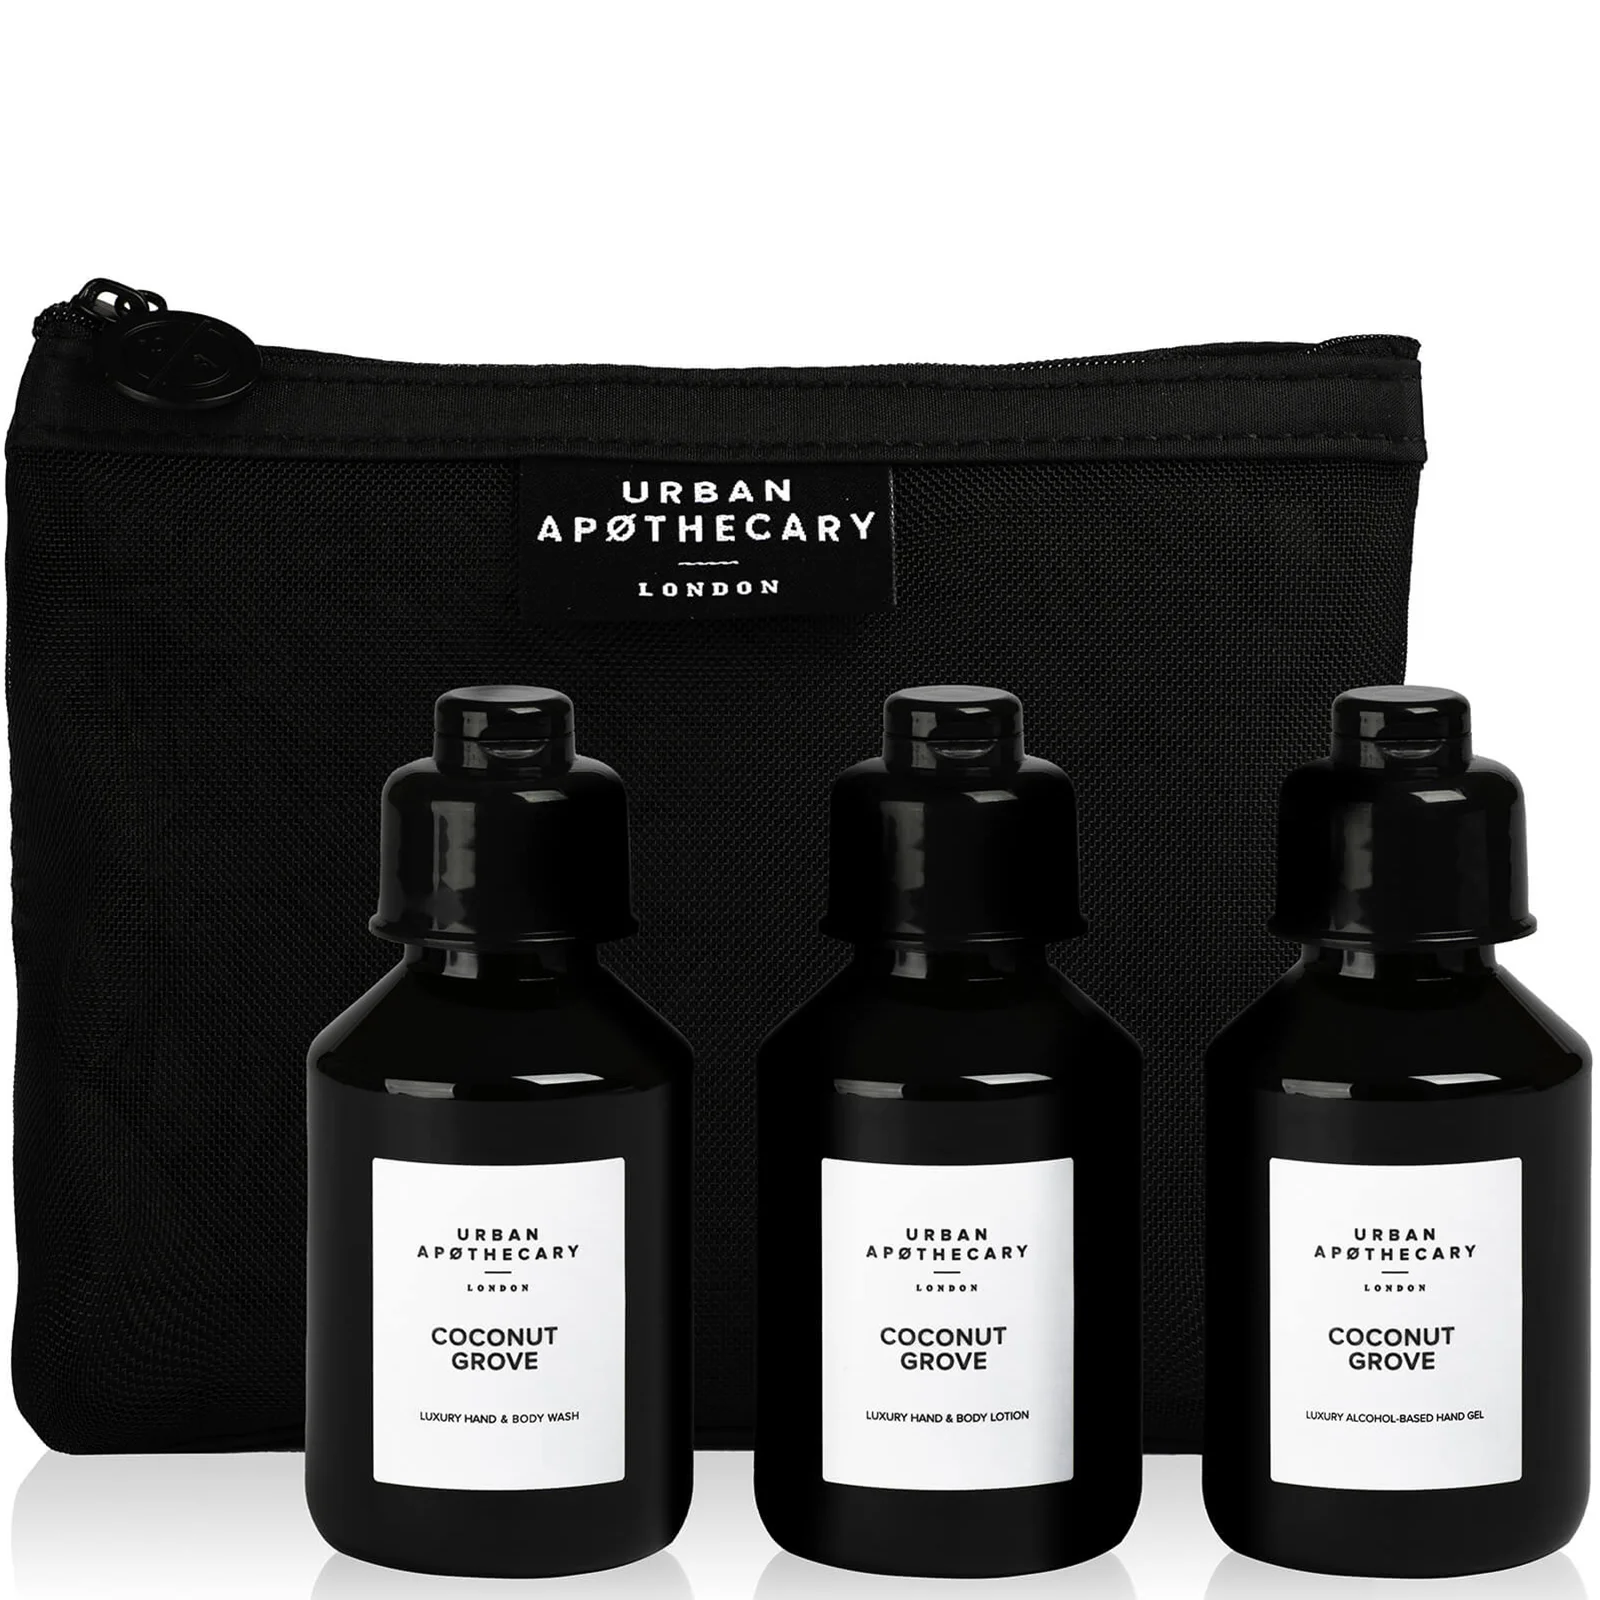 Urban Apothecary Coconut Grove Luxury Bath and Body Gift Set (3 Pieces) Image 1